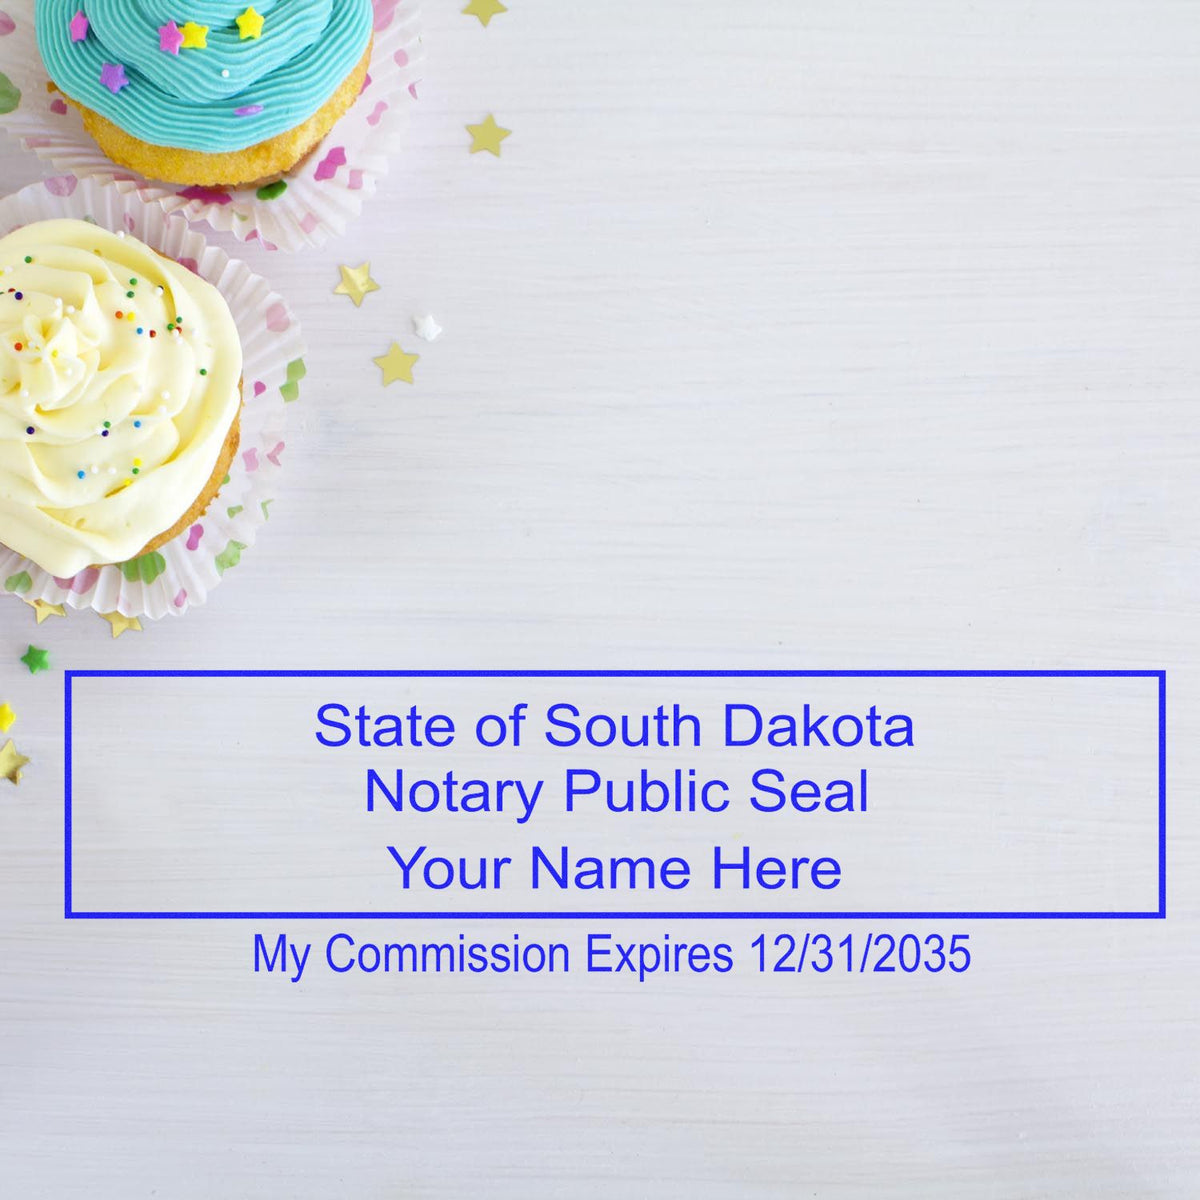 A stamped impression of the Super Slim South Dakota Notary Public Stamp in this stylish lifestyle photo, setting the tone for a unique and personalized product.